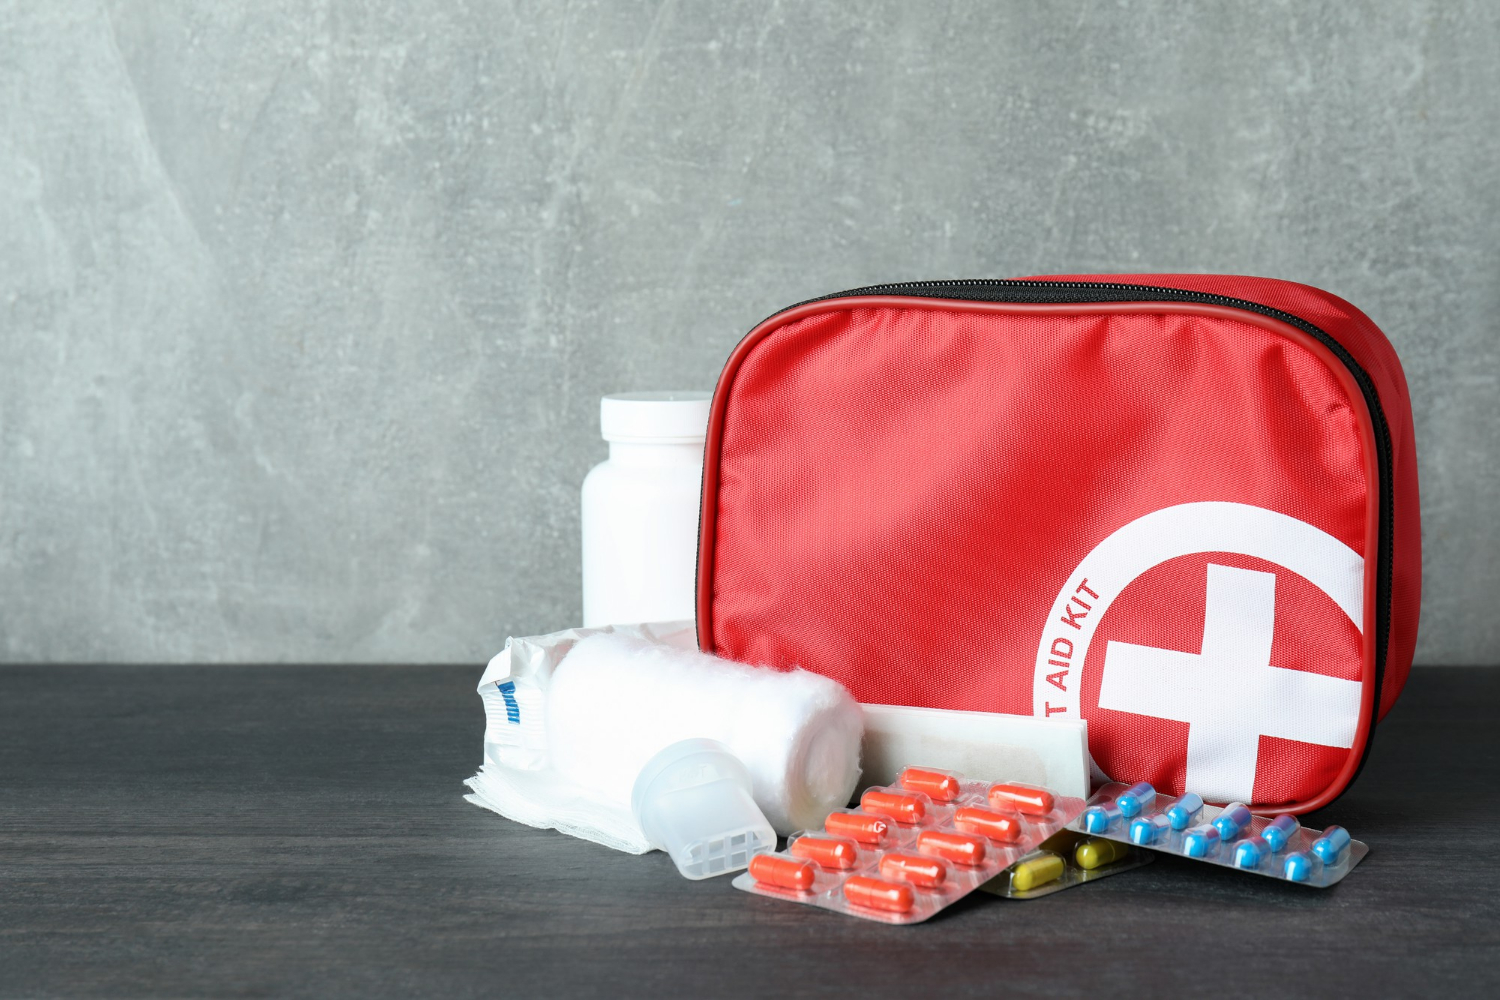 first-aid-medical-kit-dark-wooden-table